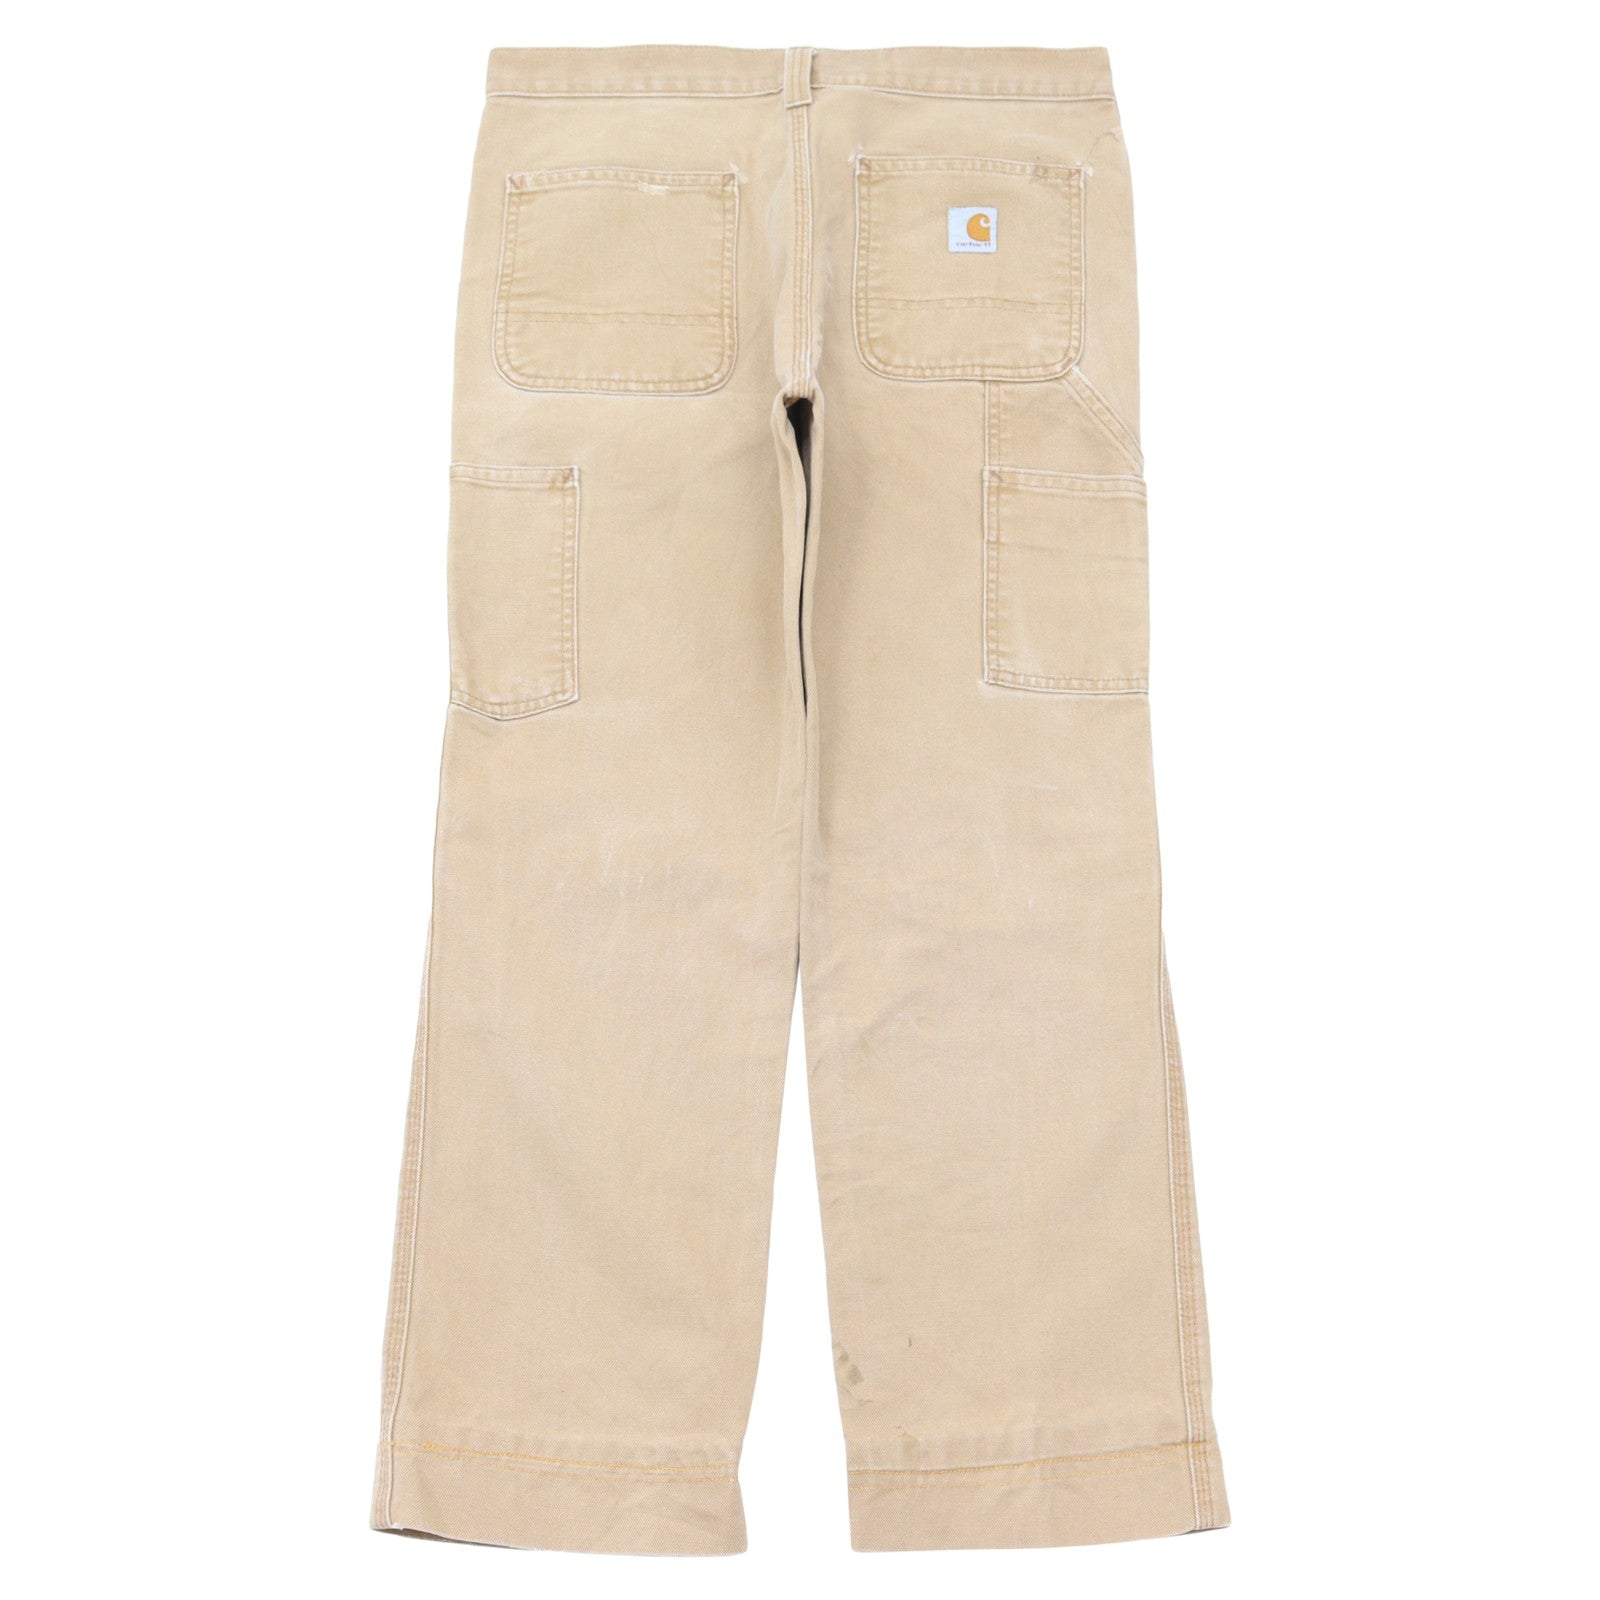 Carhartt WIP Calder Pant - Larch - Clothing from Fat Buddha Store UK